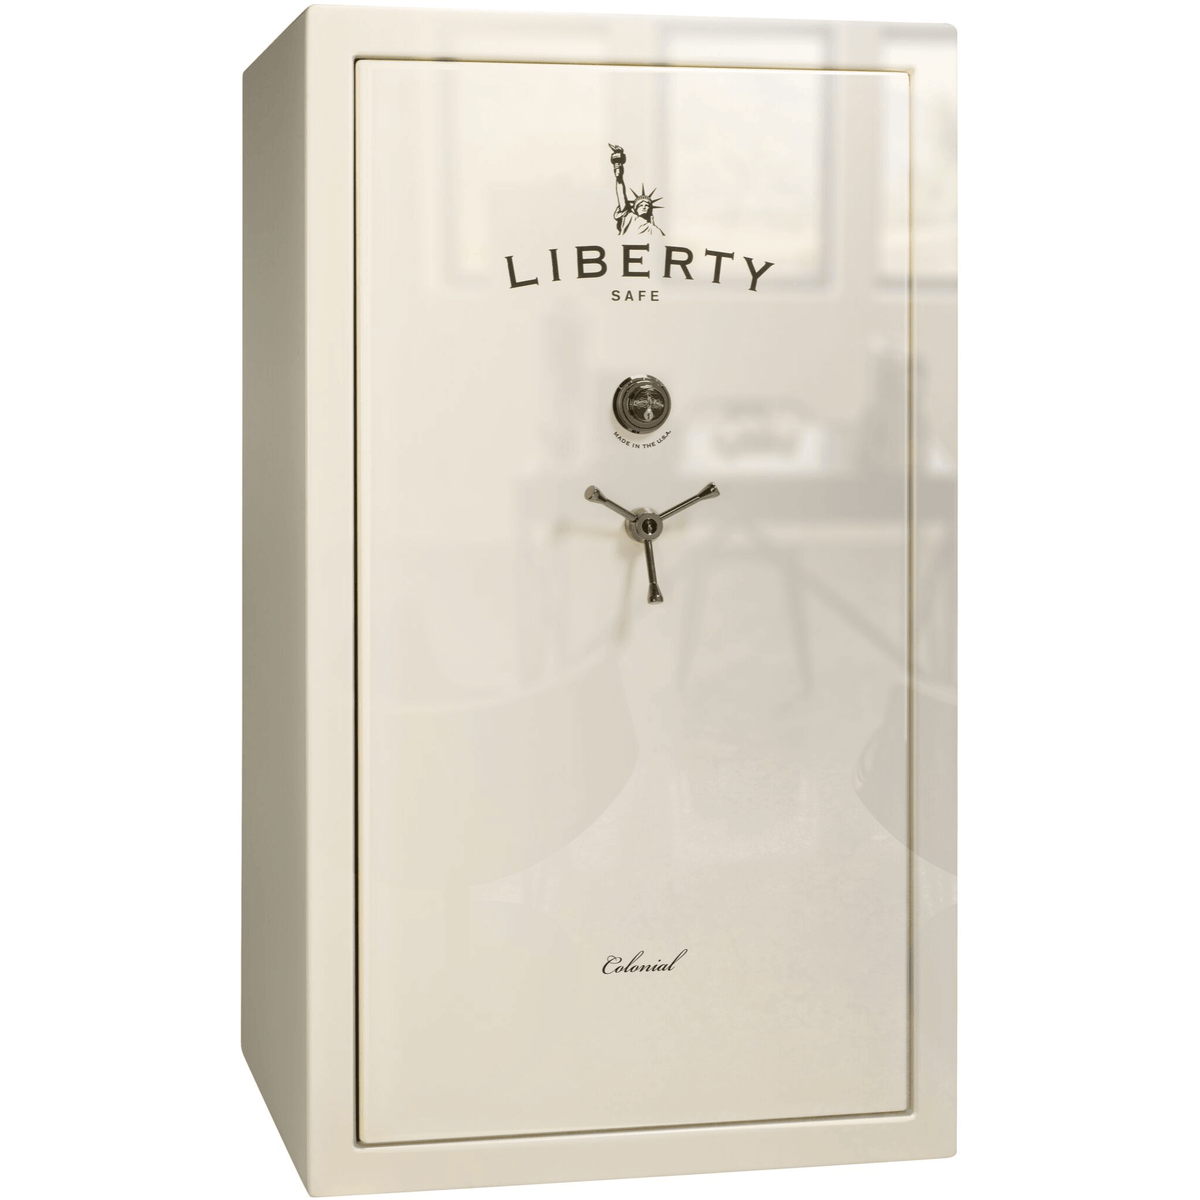 Liberty Colonial 50 Safe in White Gloss with Black Chrome Mechanical Lock.